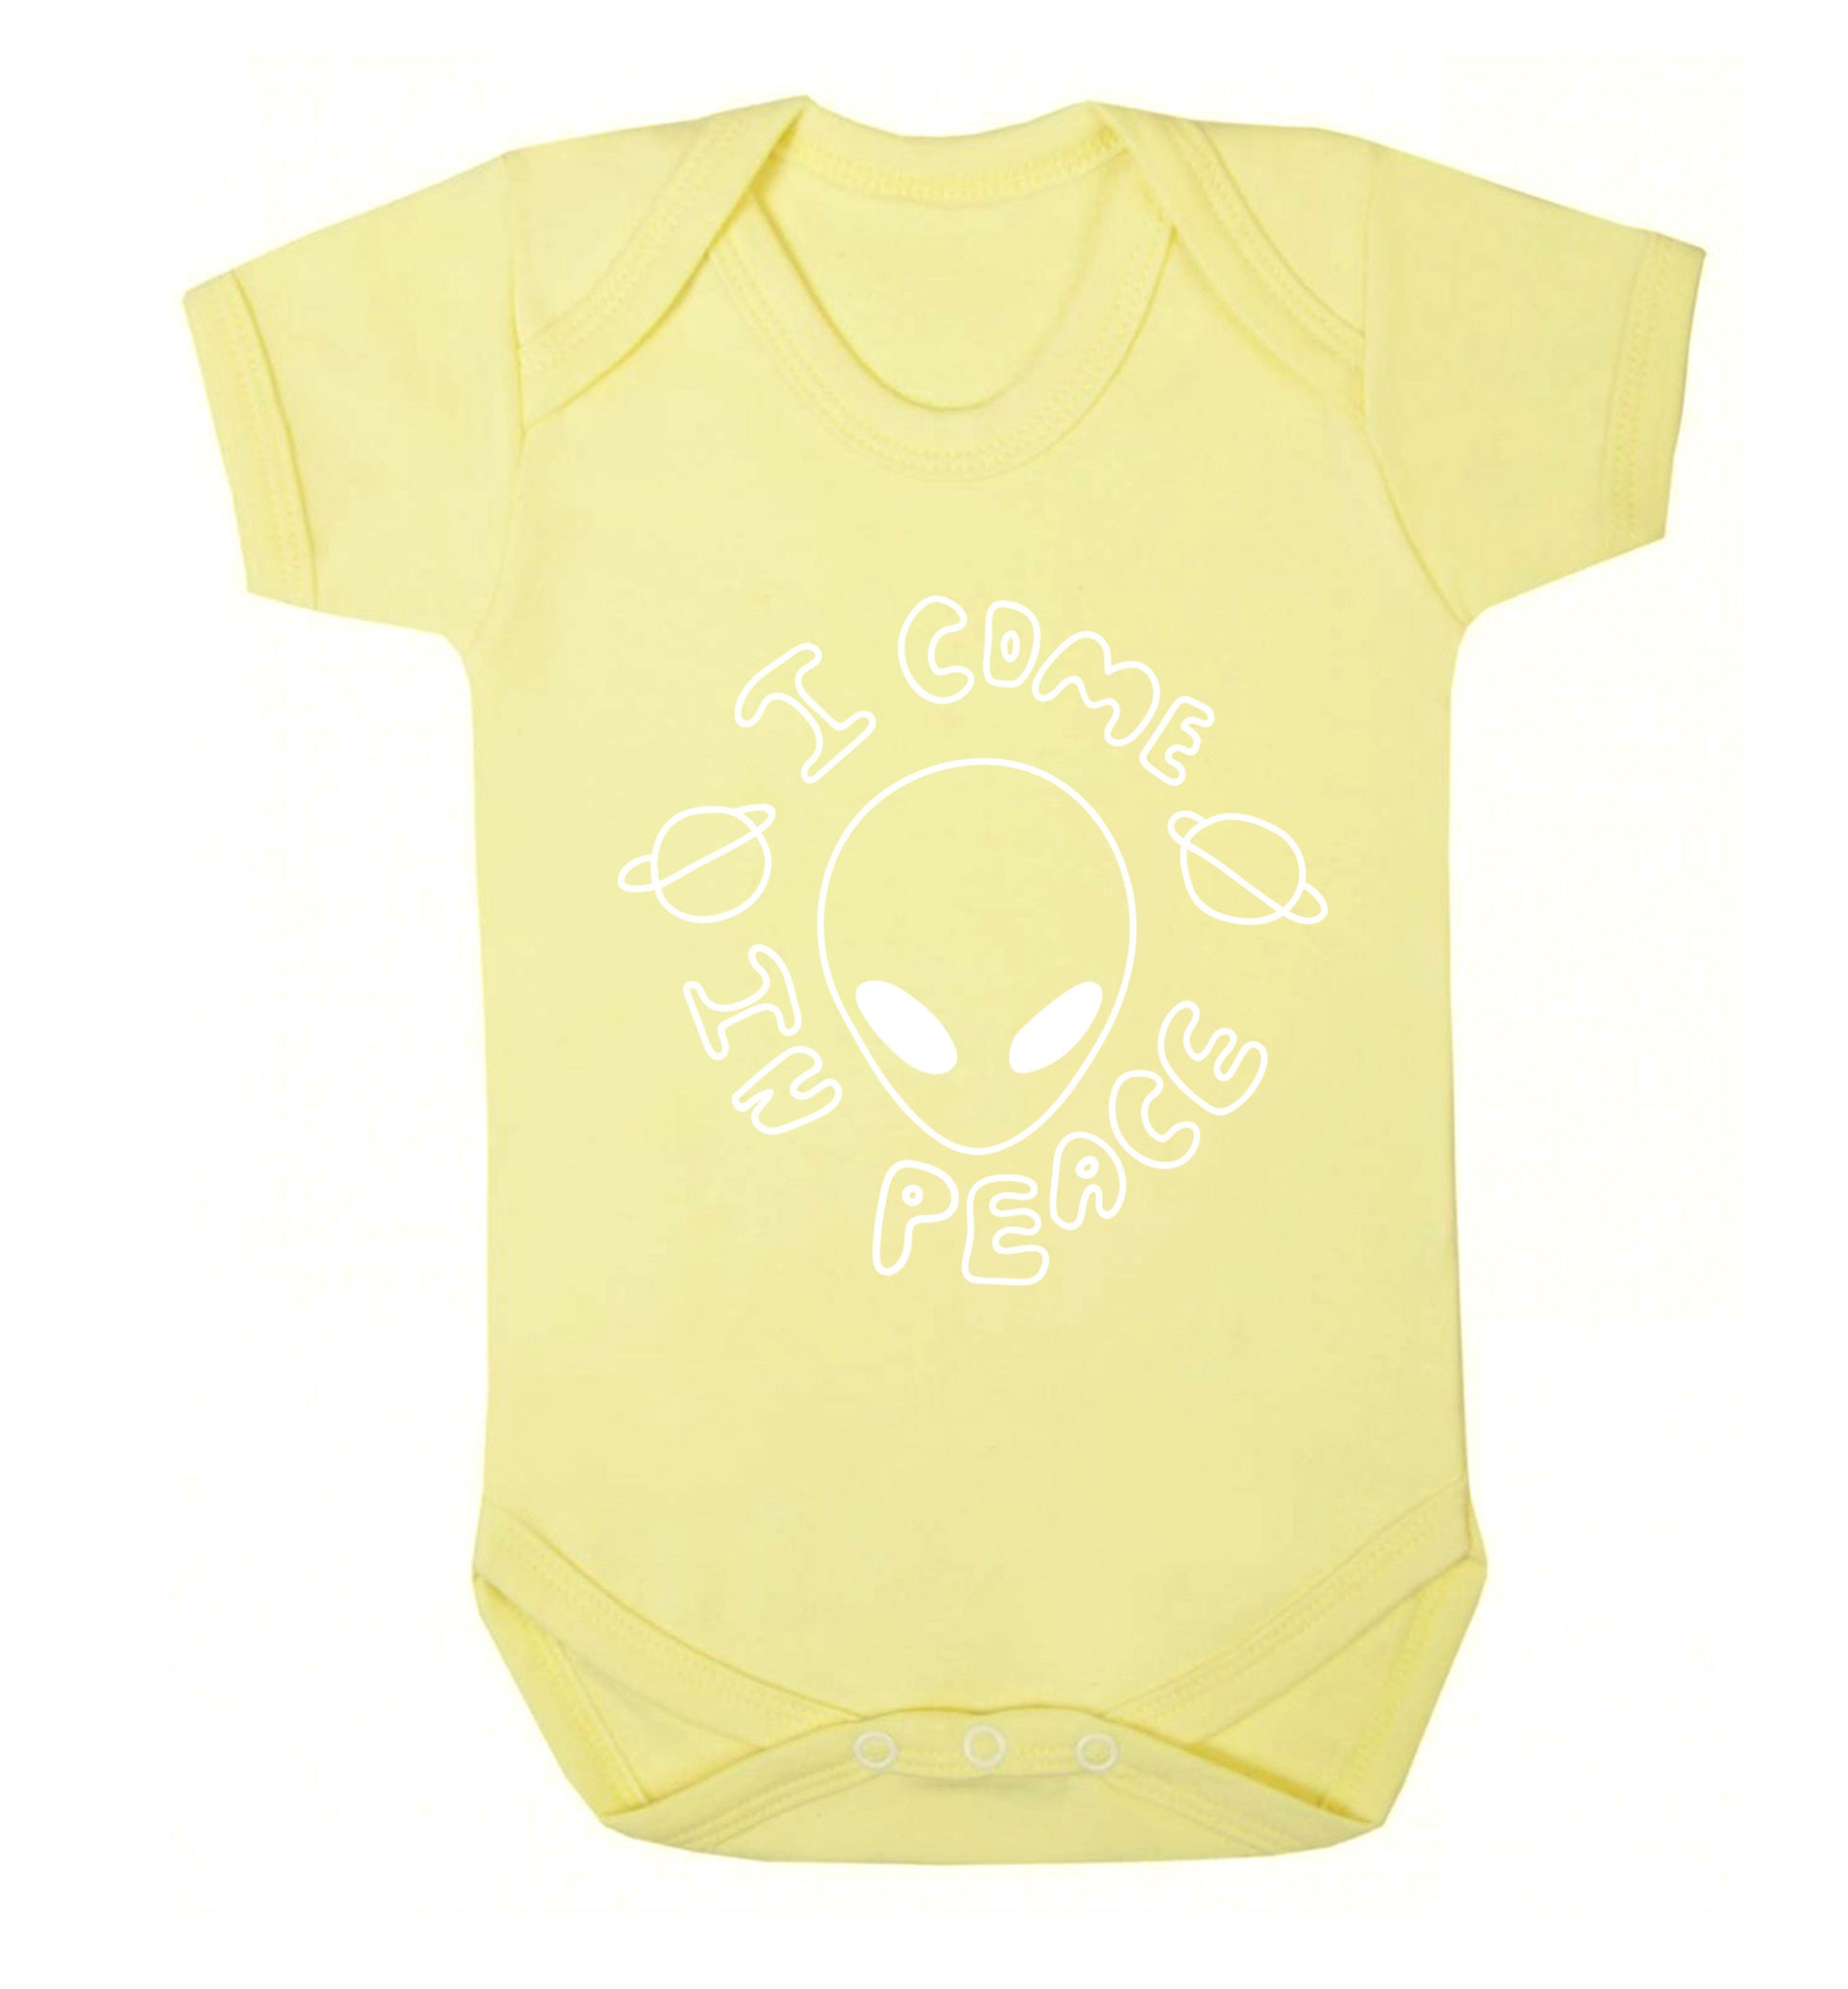 I come in peace Baby Vest pale yellow 18-24 months